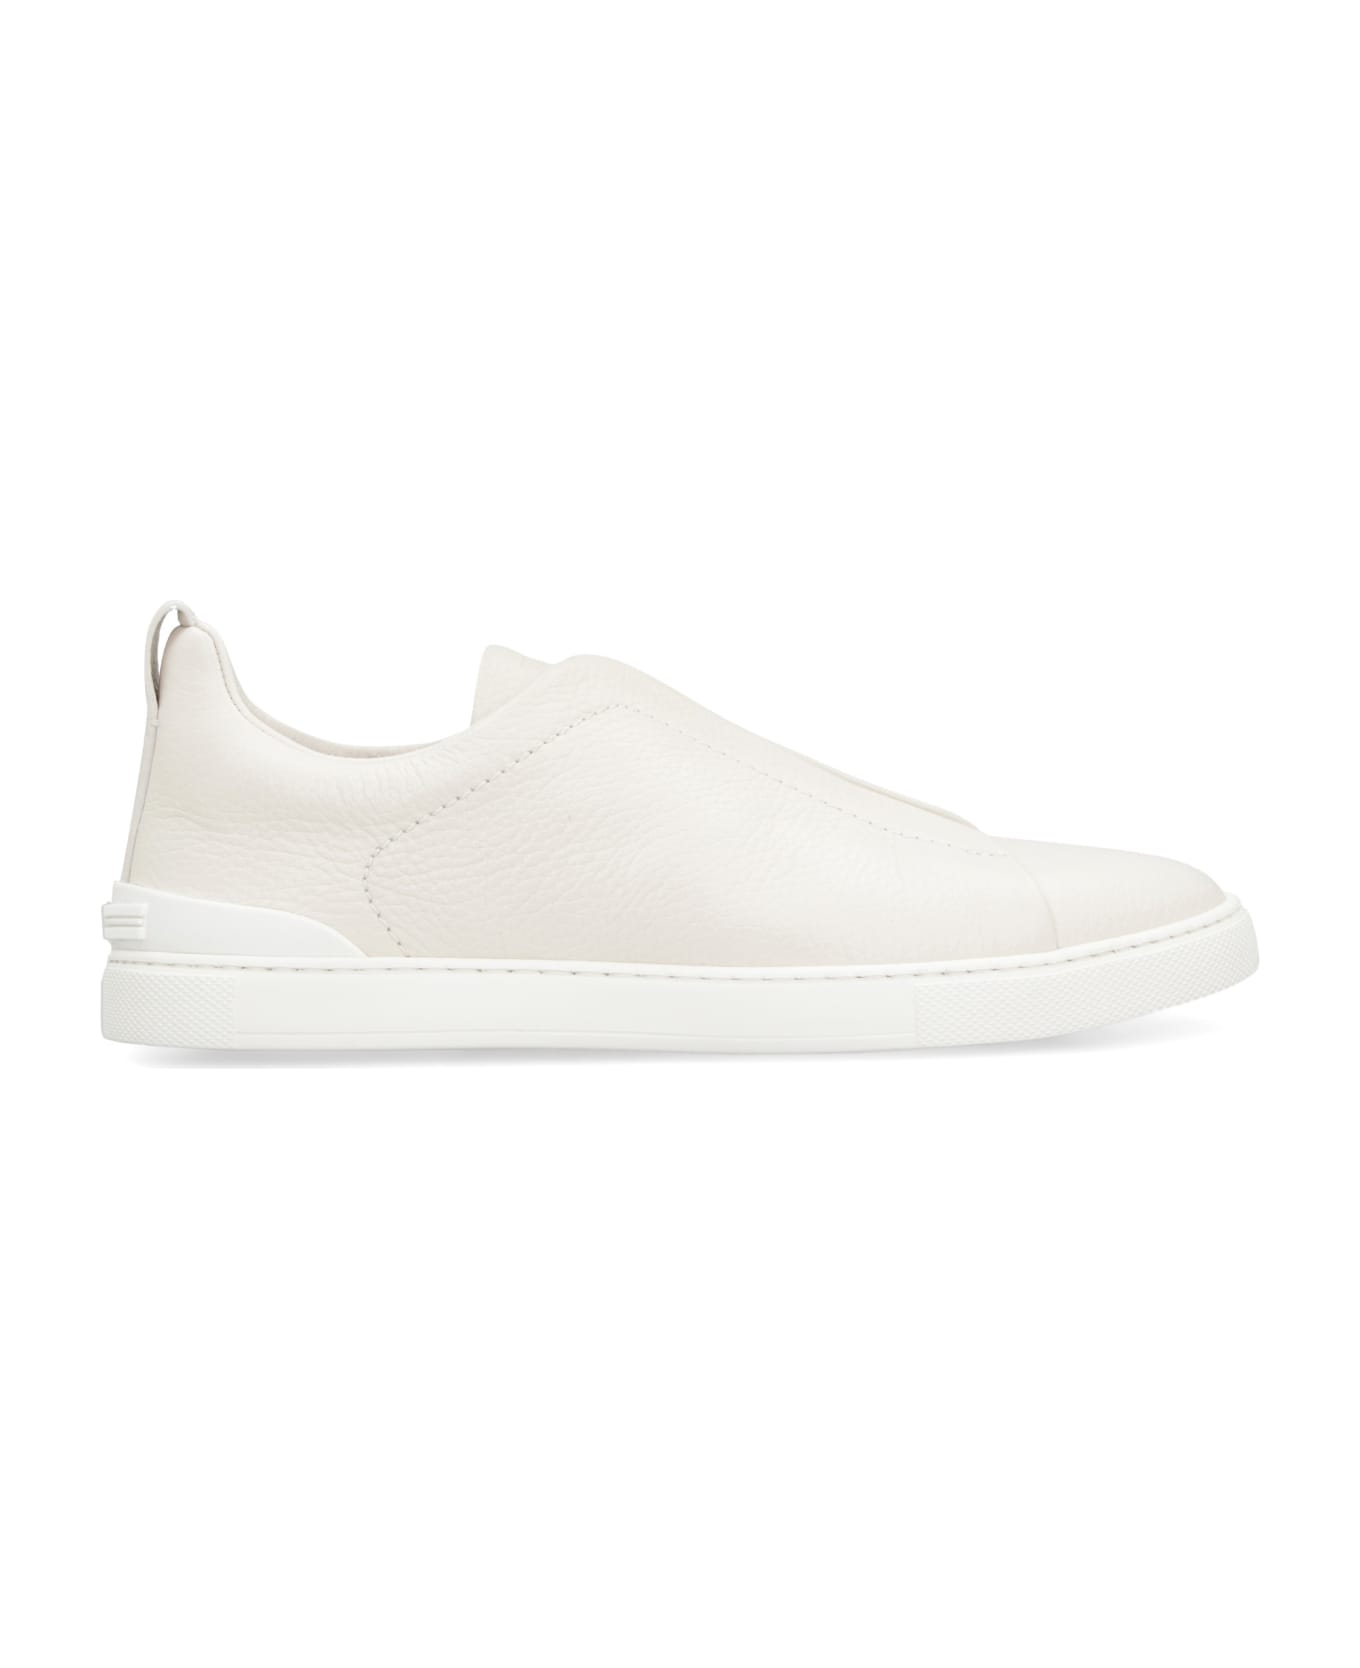 Zegna Triple Stitch Leather Sneakers - White スニーカー